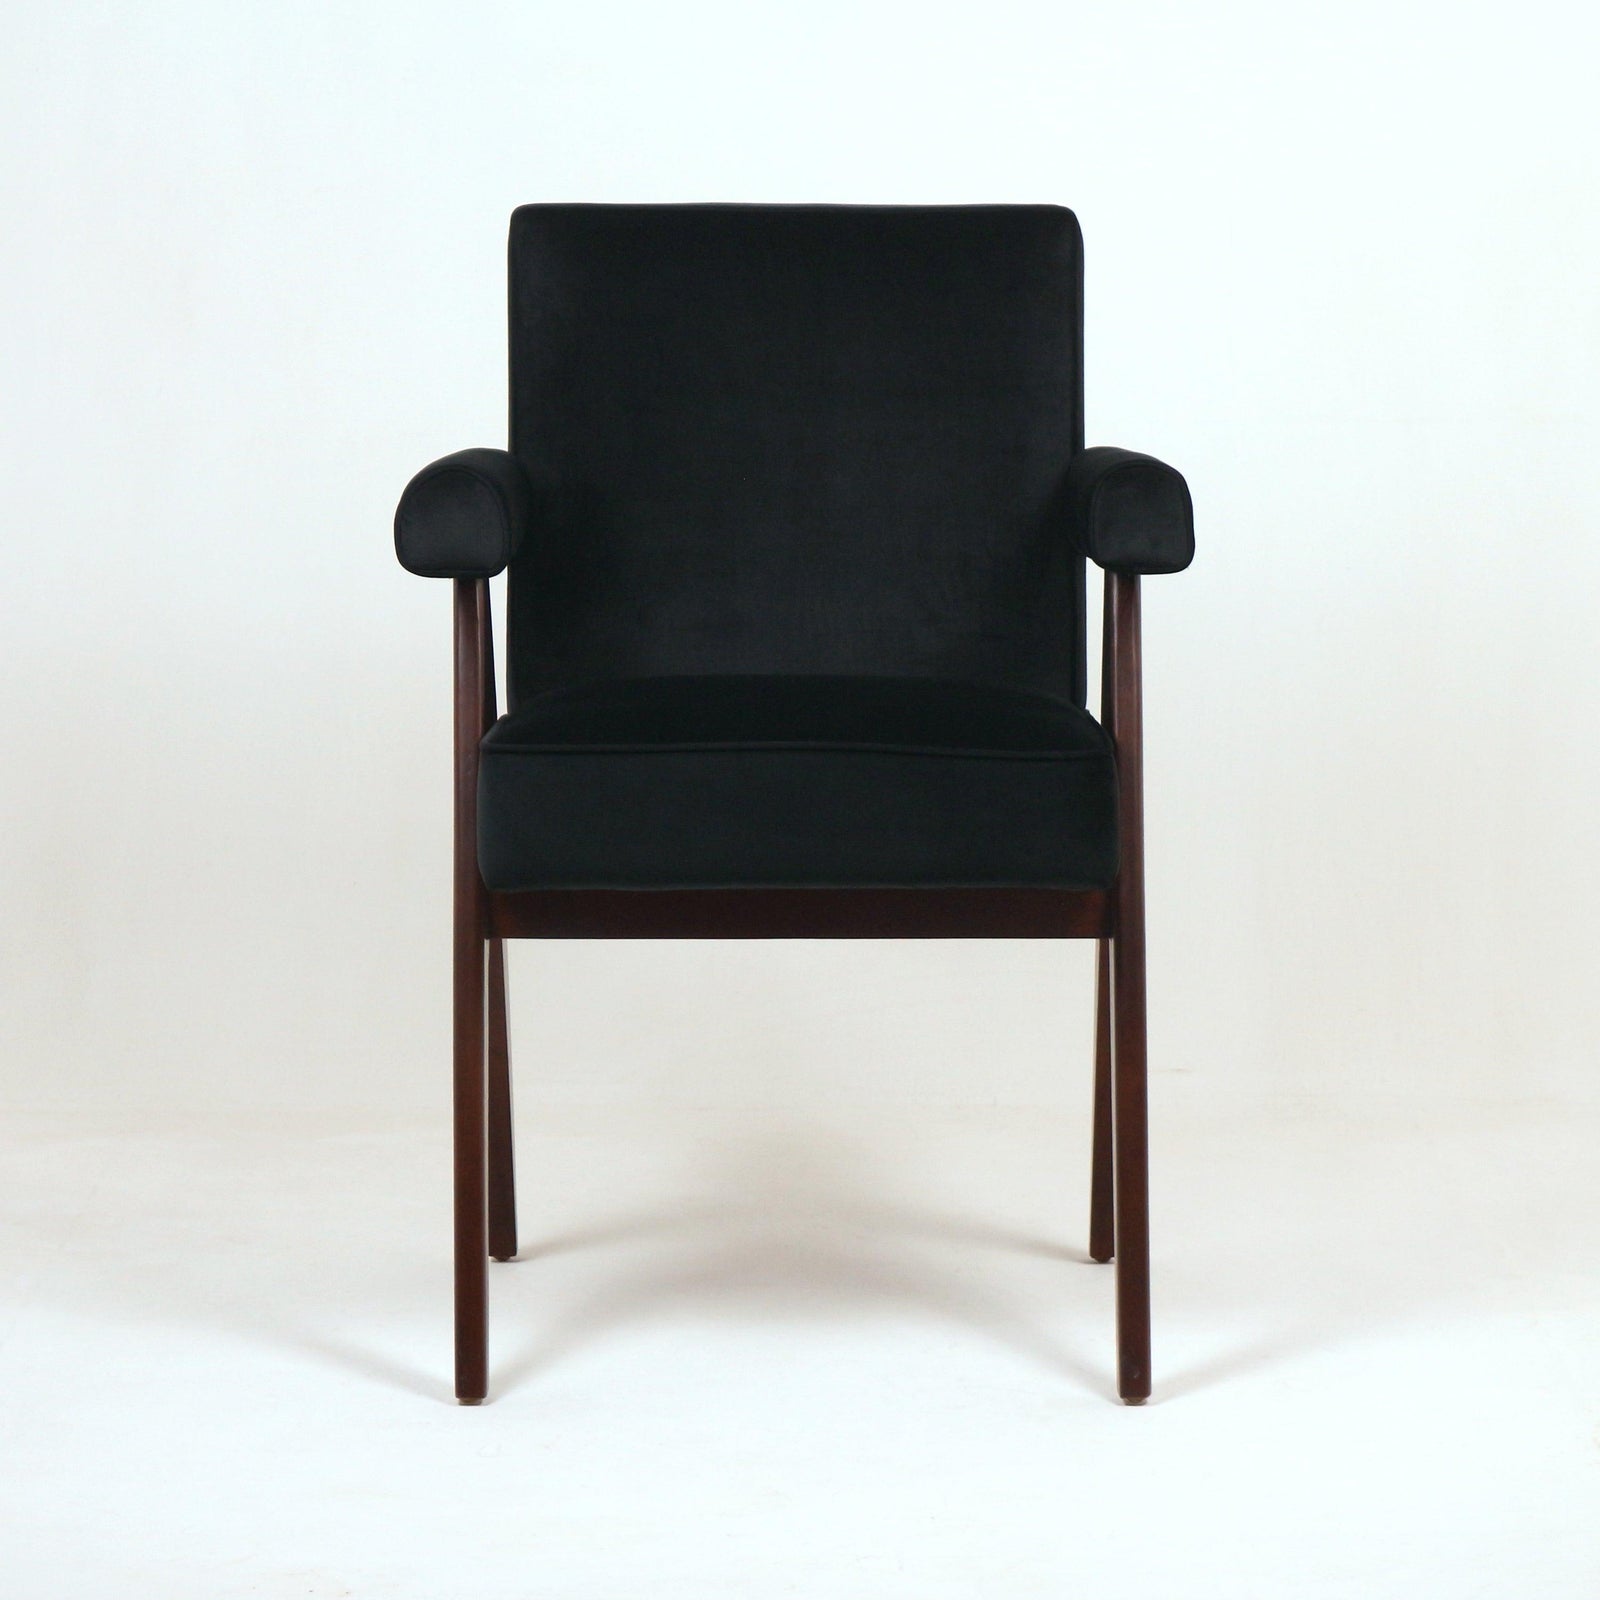 Jeanneret Committee Chair - INTERIORTONIC